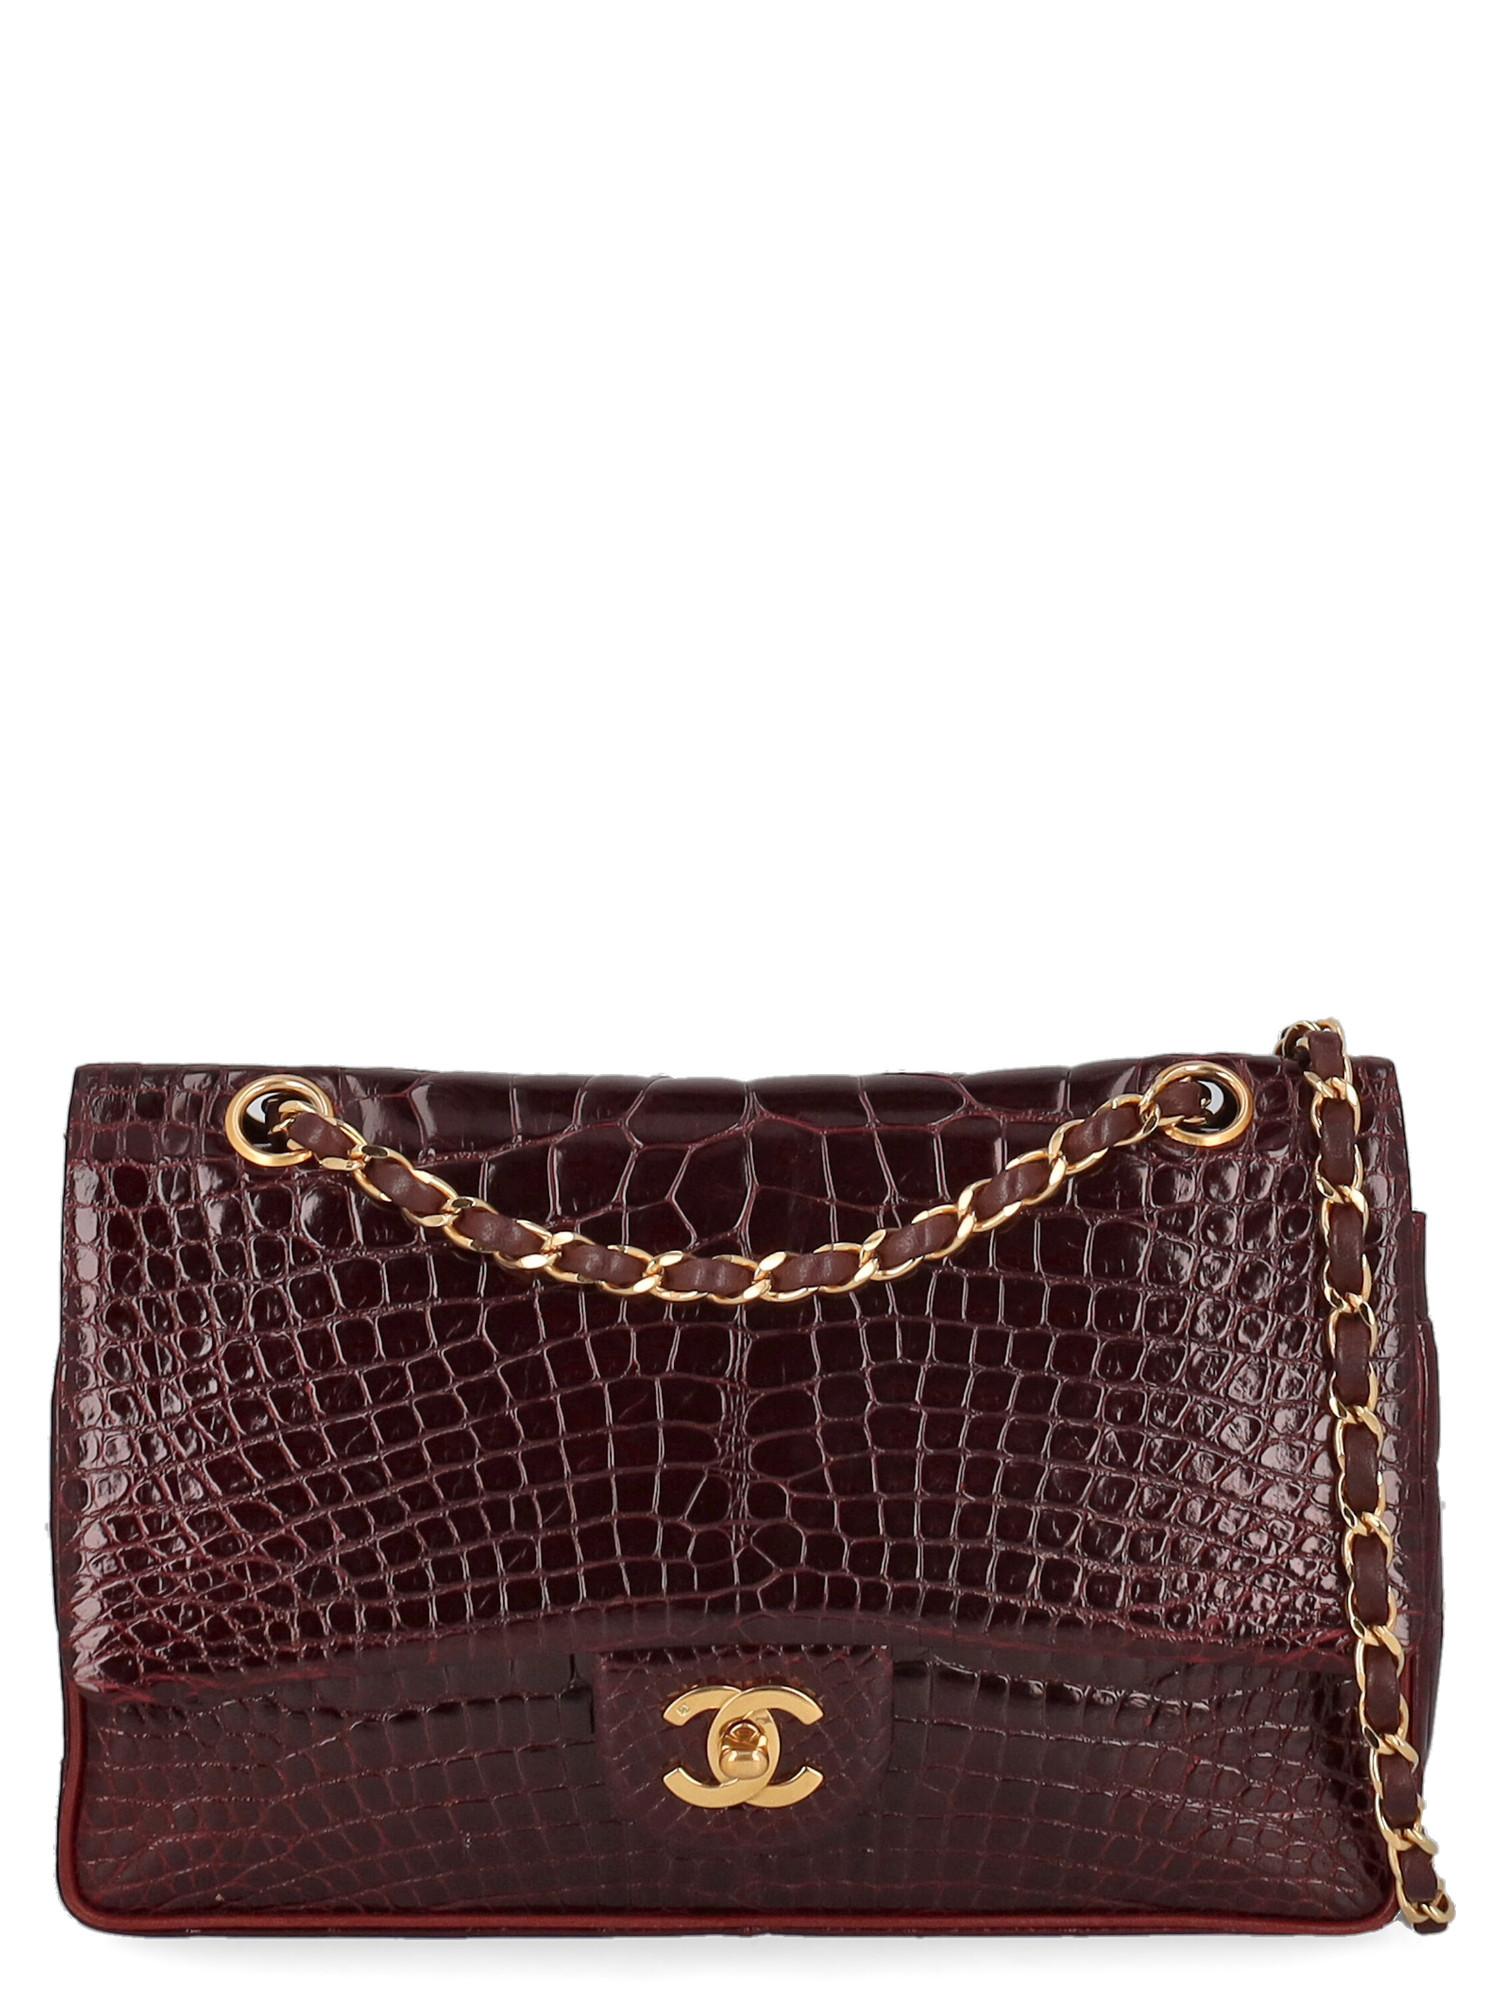 Women's Shoulder Bags - Chanel - In Burgundy Leather